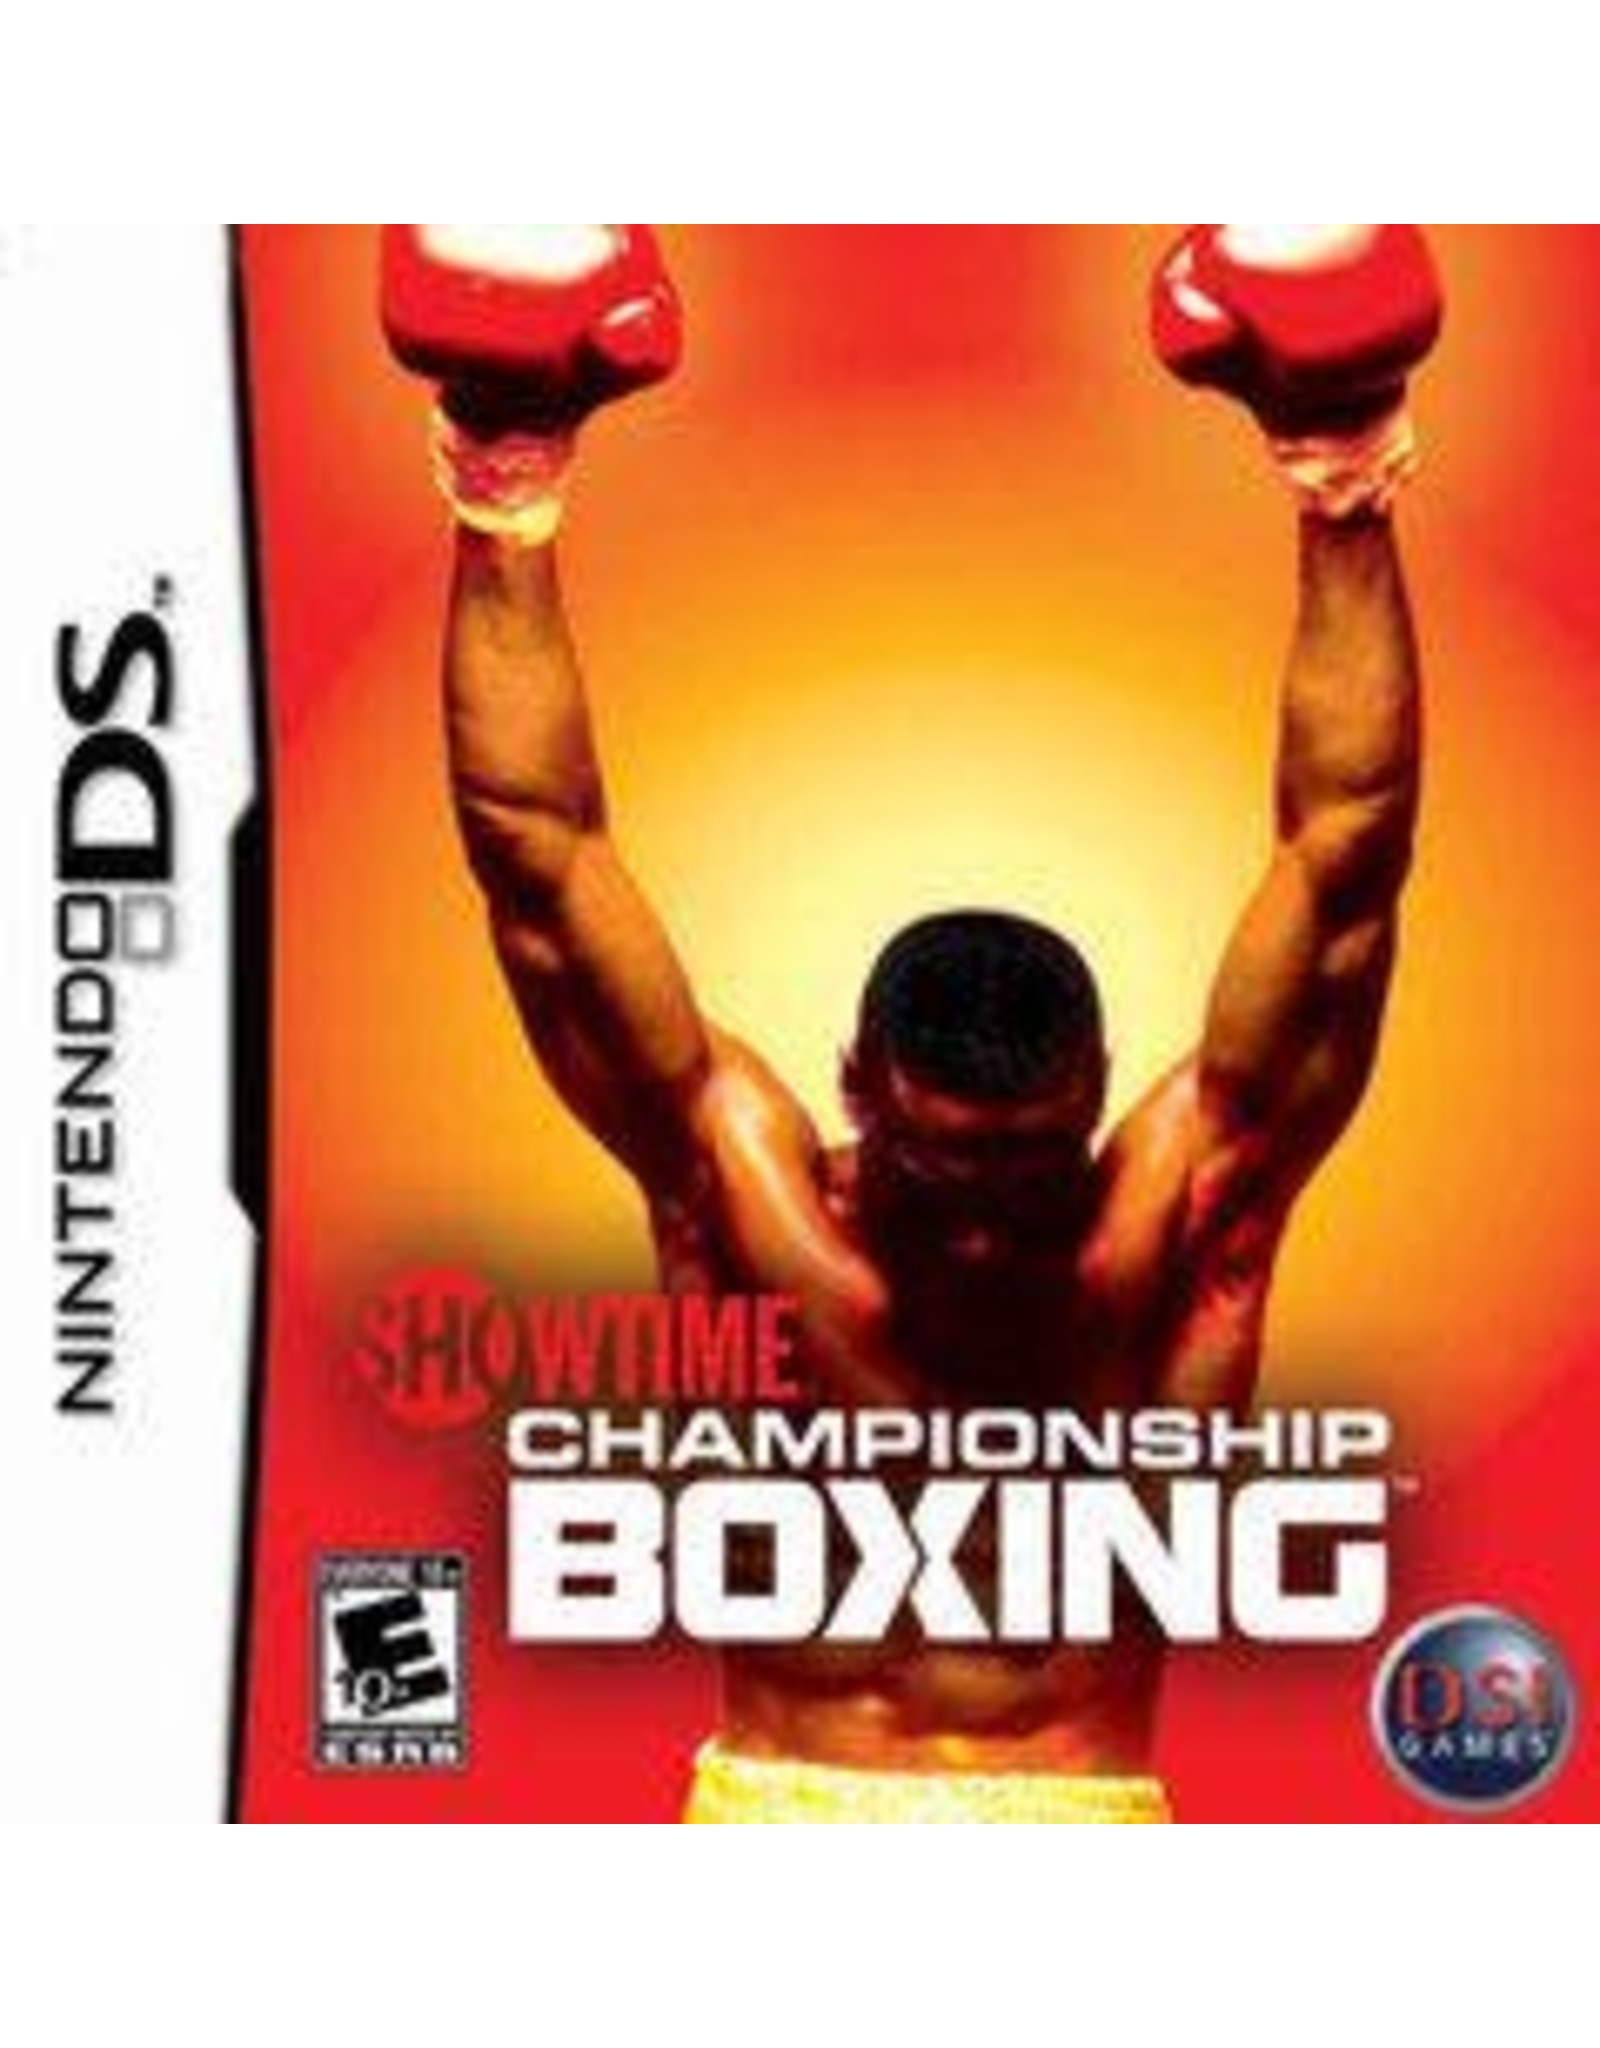 Nintendo DS Showtime Championship Boxing (Cart Only)